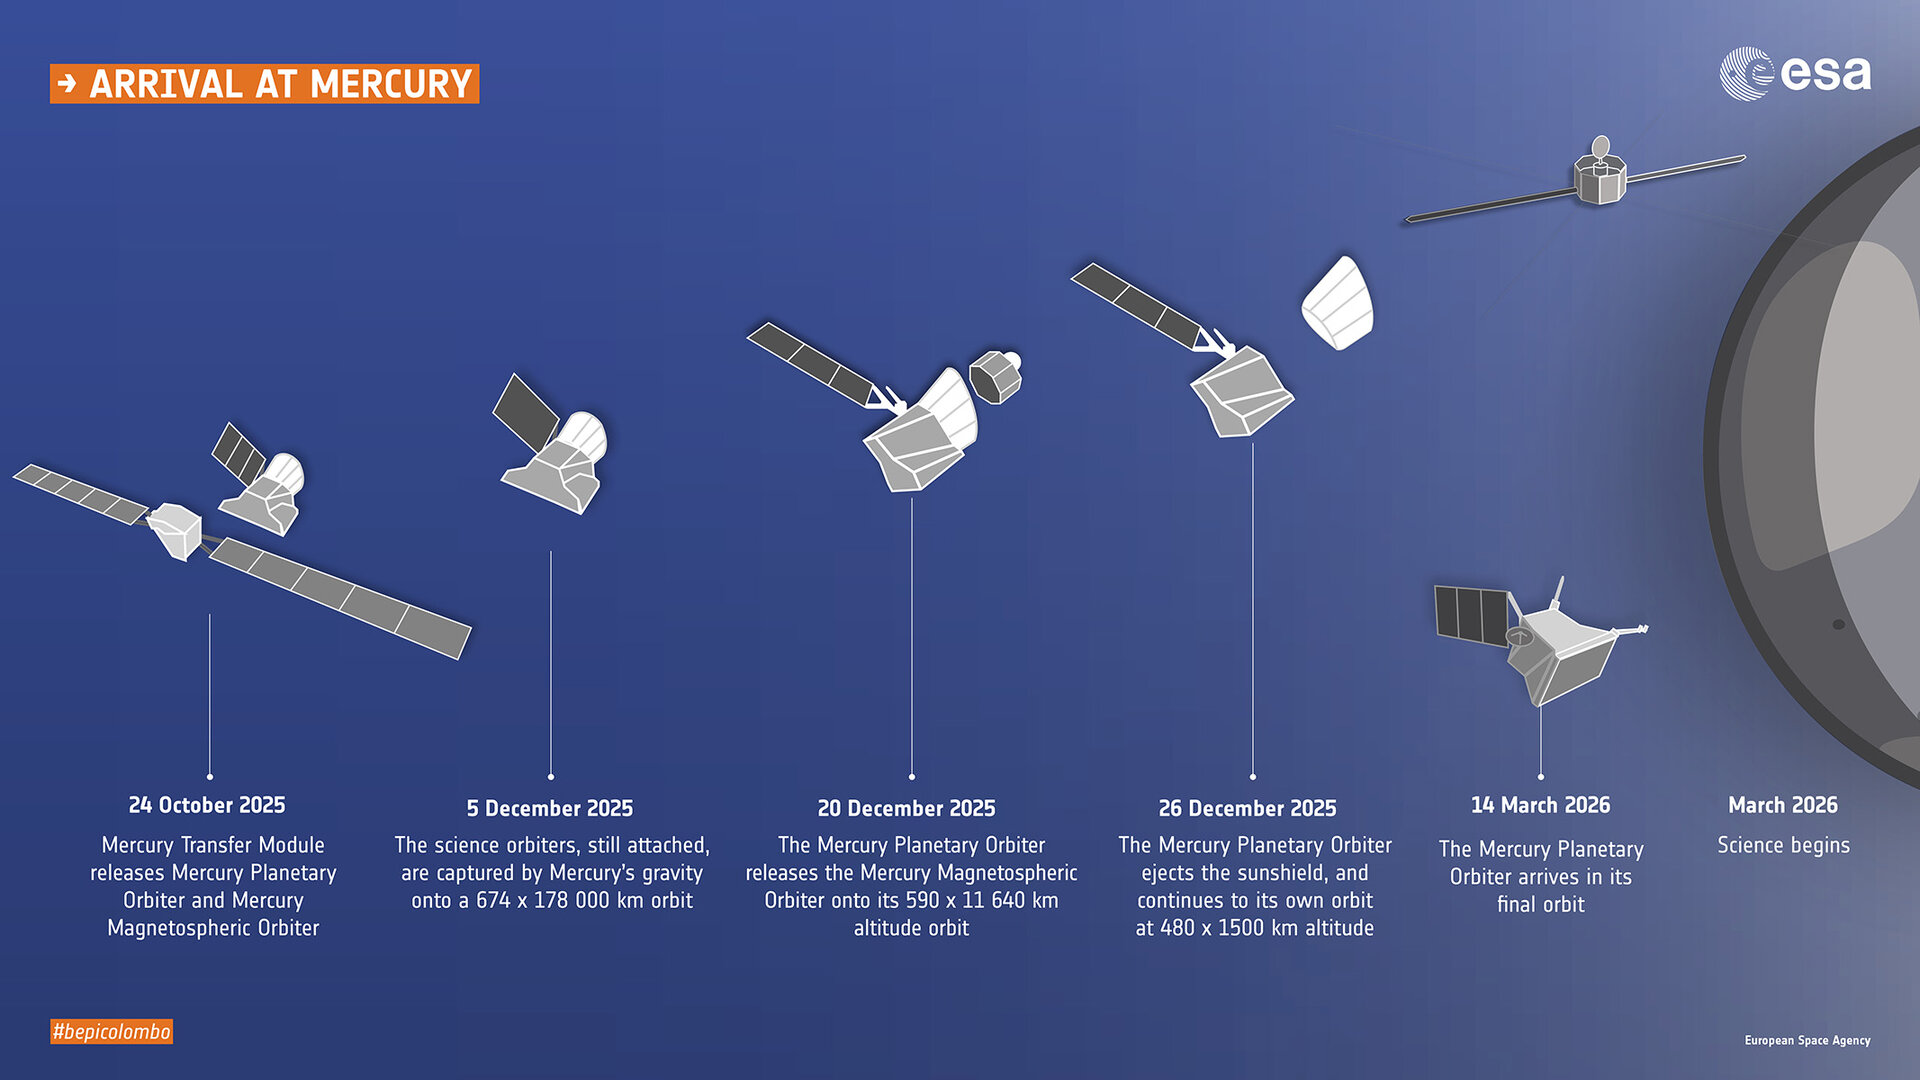 BepiColombo arrival at Mercury timeline